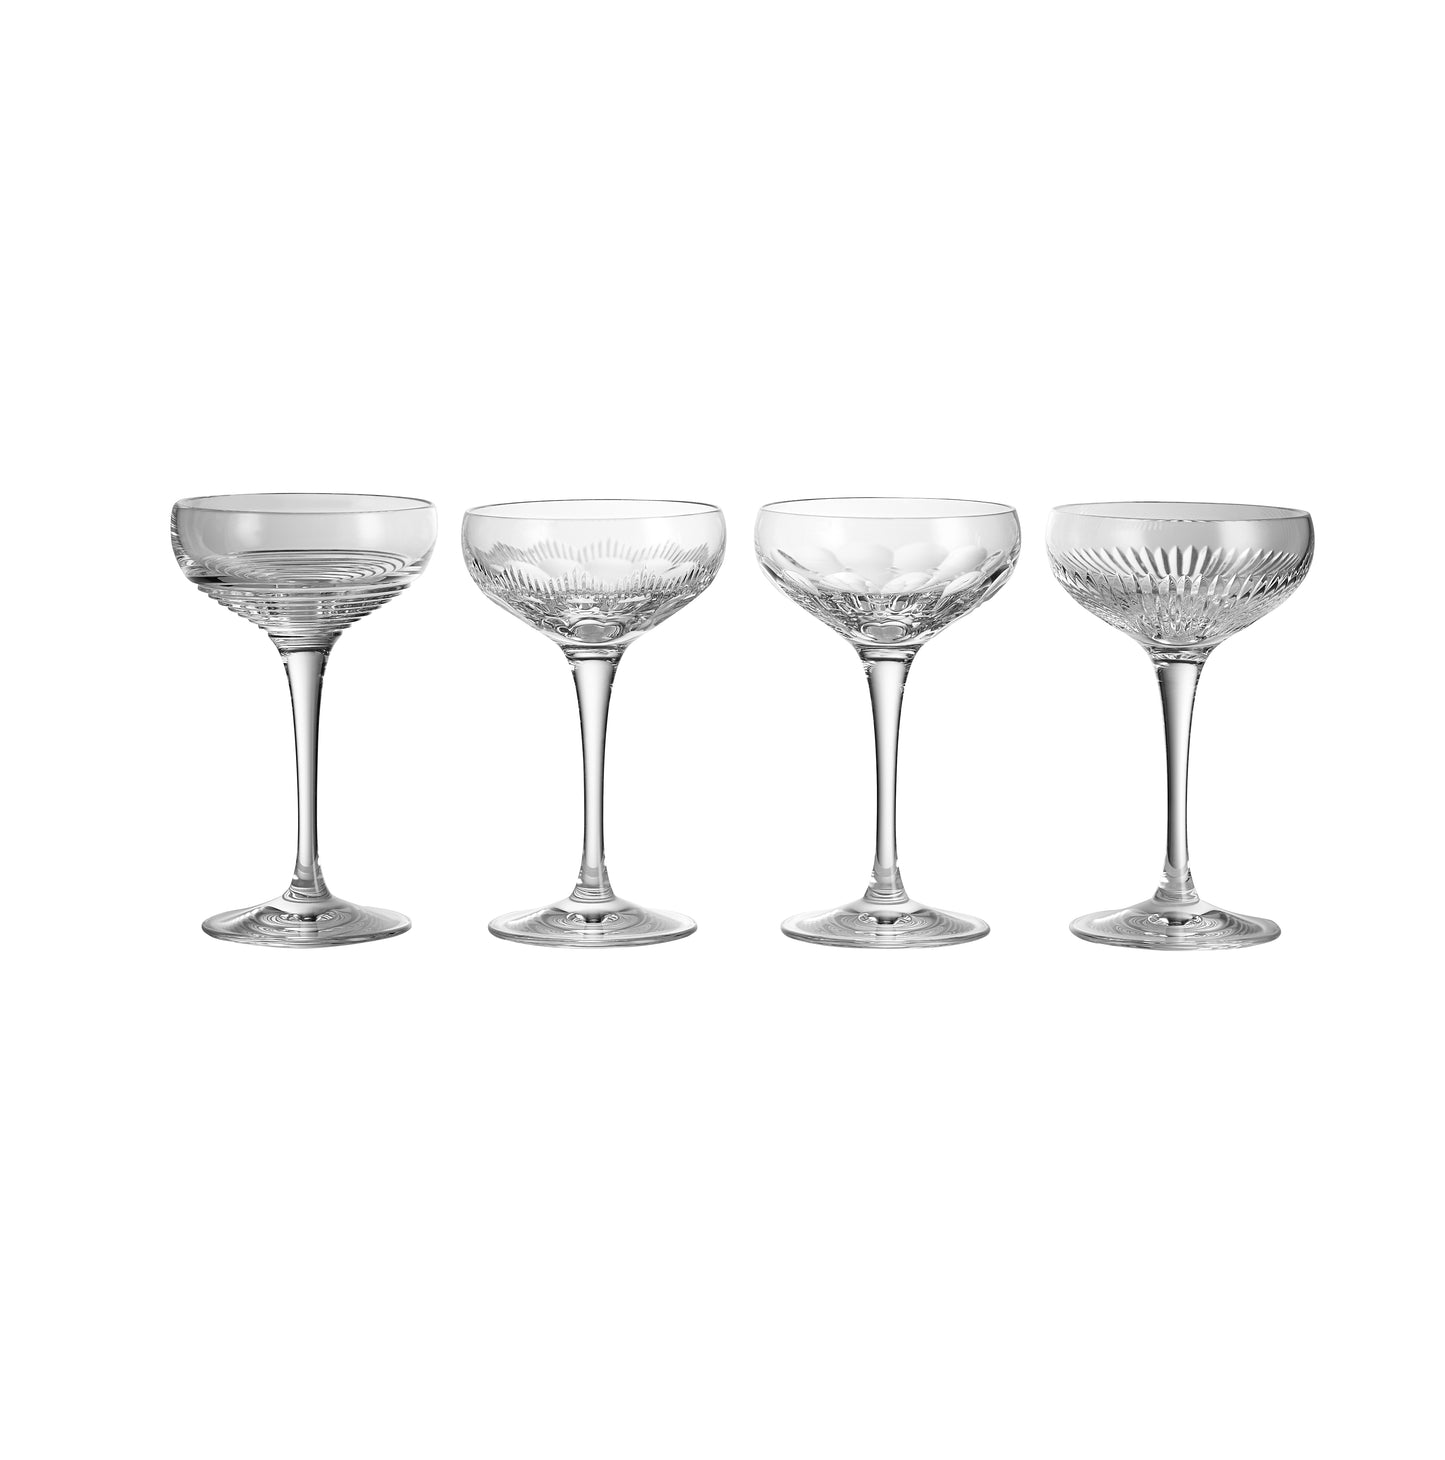 Waterford Crystal Mixology Champagne Coupe Glass Set of 4